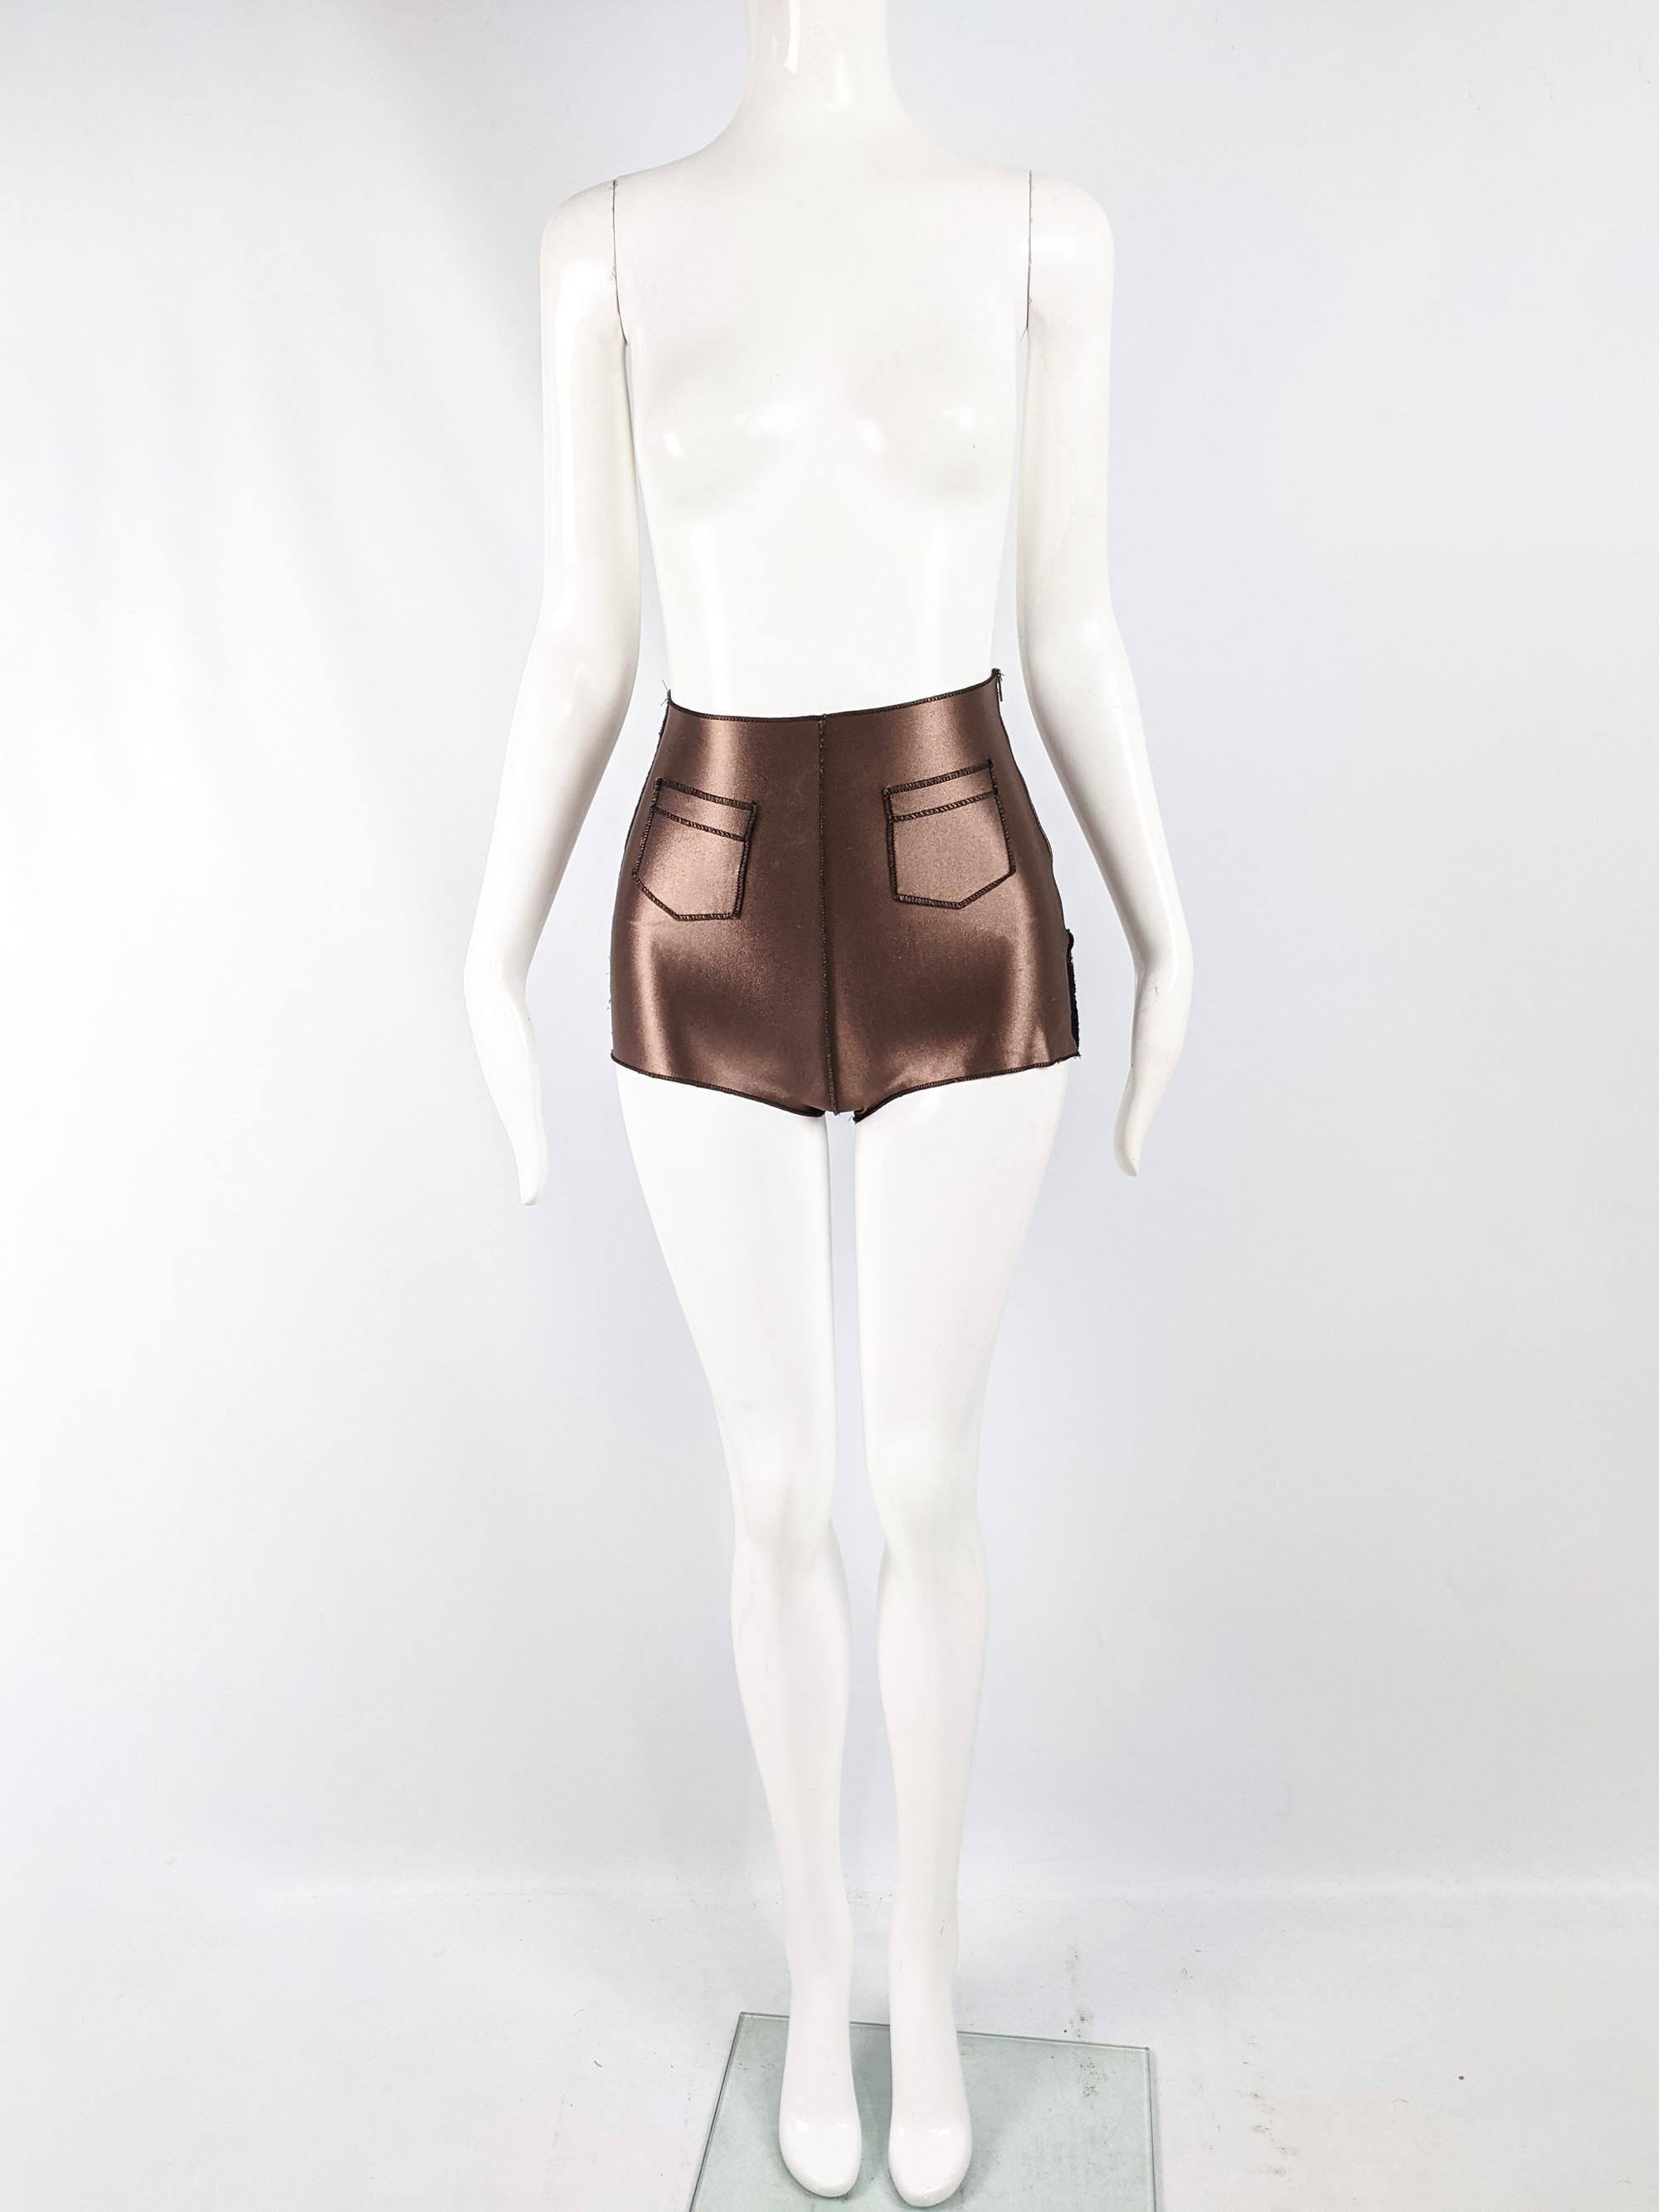 A fabulous pair of vintage hot pants by cult French fashion designer, Jean Colonna. In a bronze satin fabric with exposed flatlock seams and a high waist. 

Size: Marked M but measures like a modern XS / UK 6/ US 2. Please check measurements. 
Waist